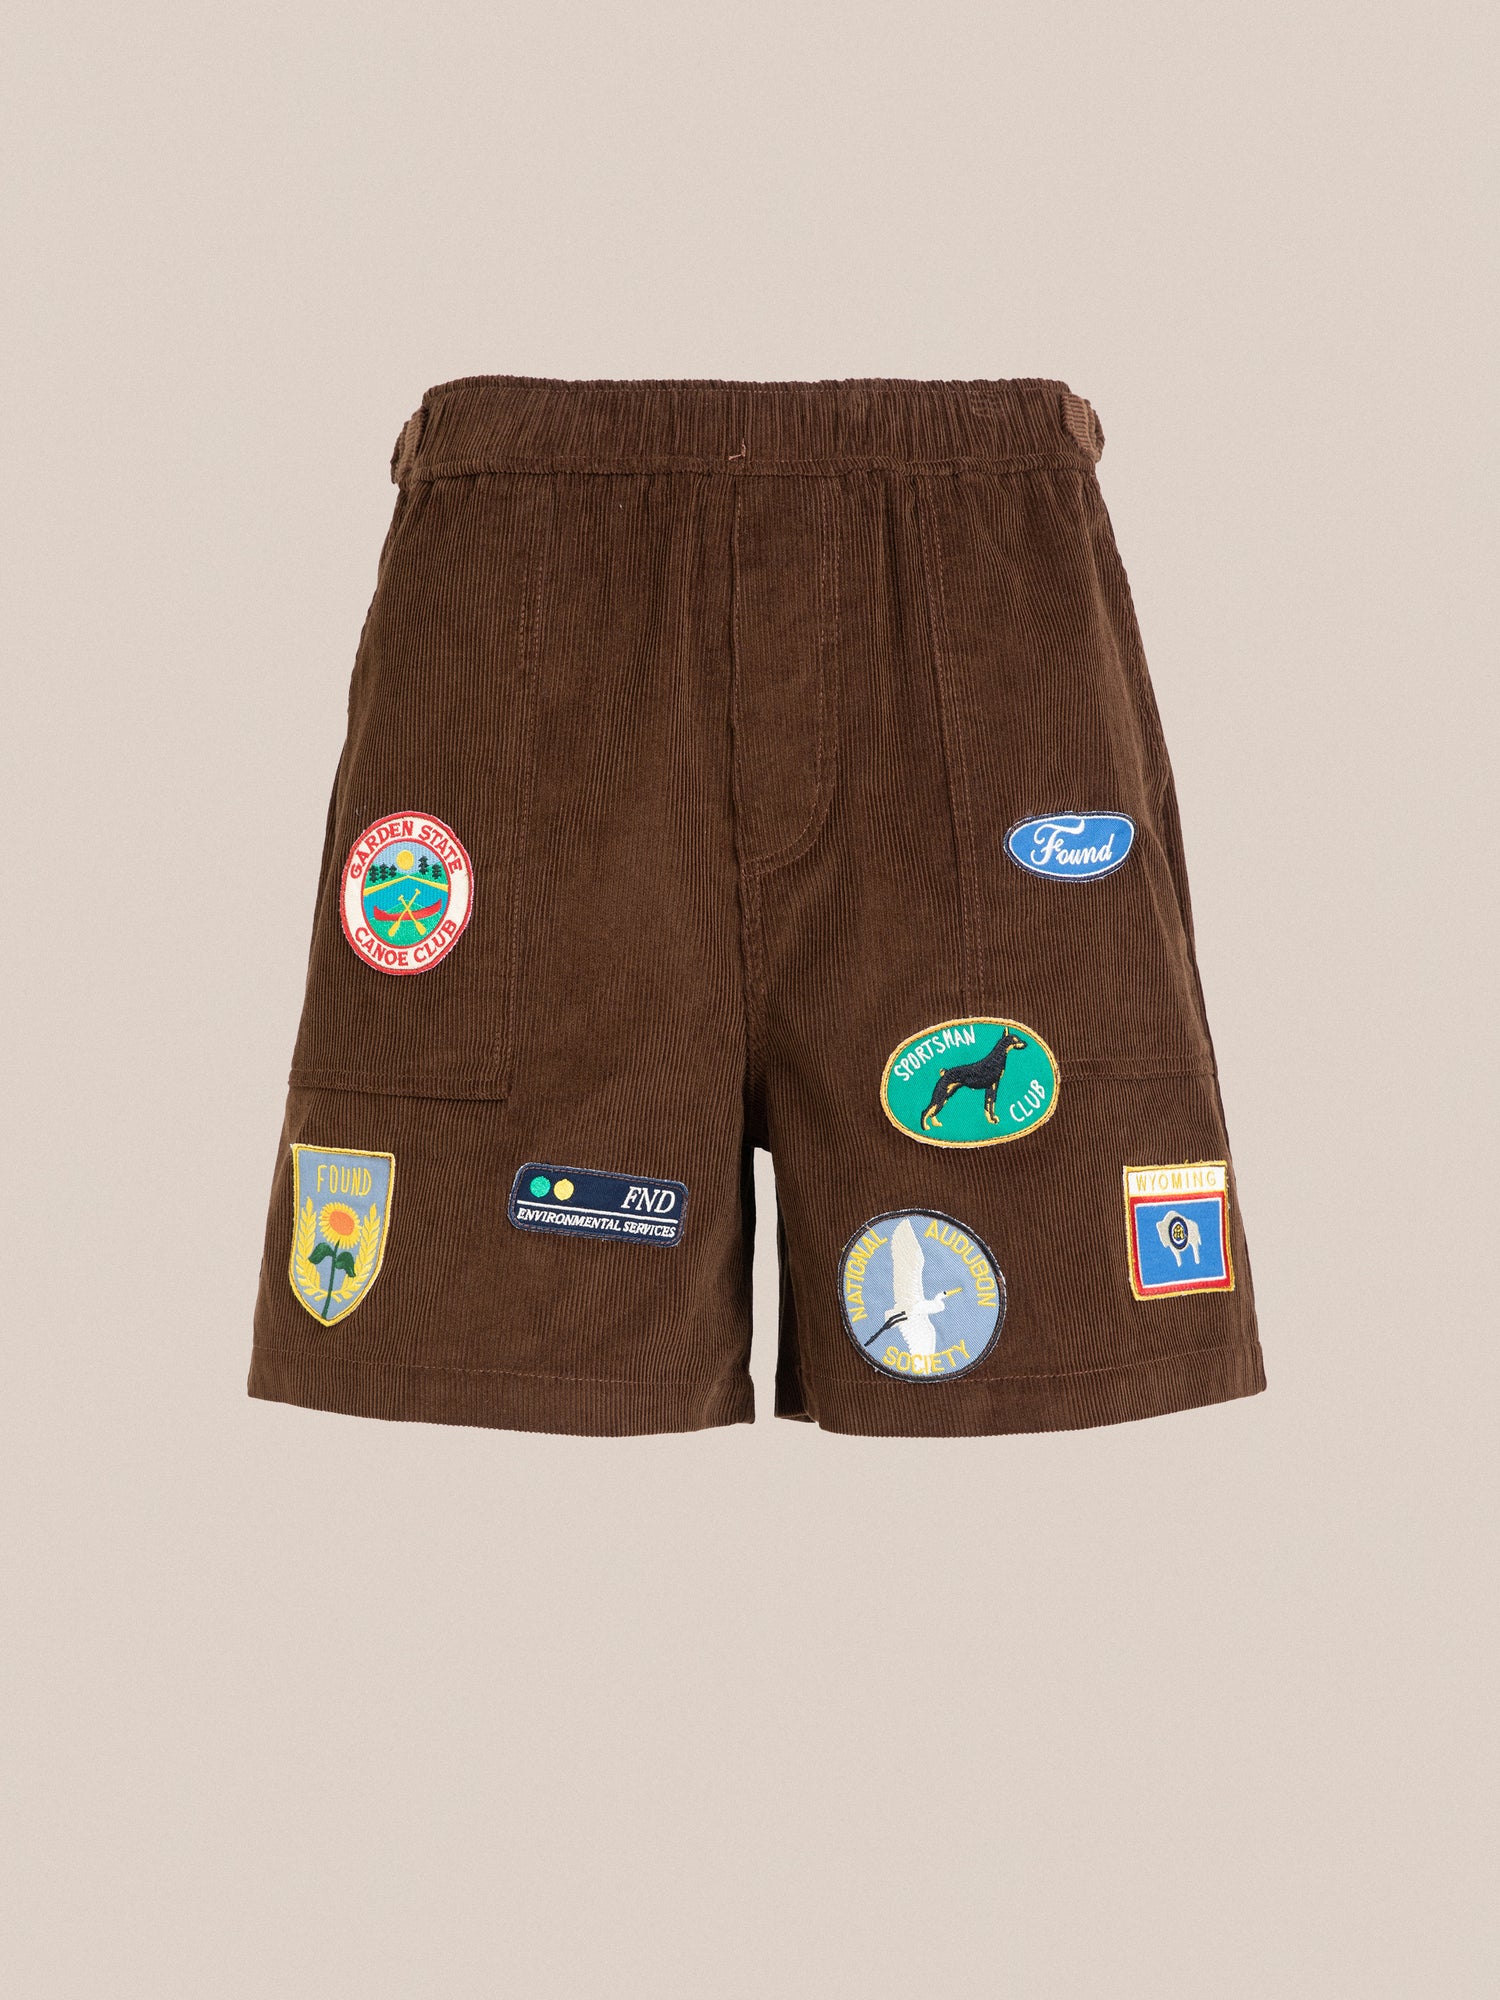 A brown Canoe Multi Patch Corduroy Shorts from Found with cricket sport patches on it.